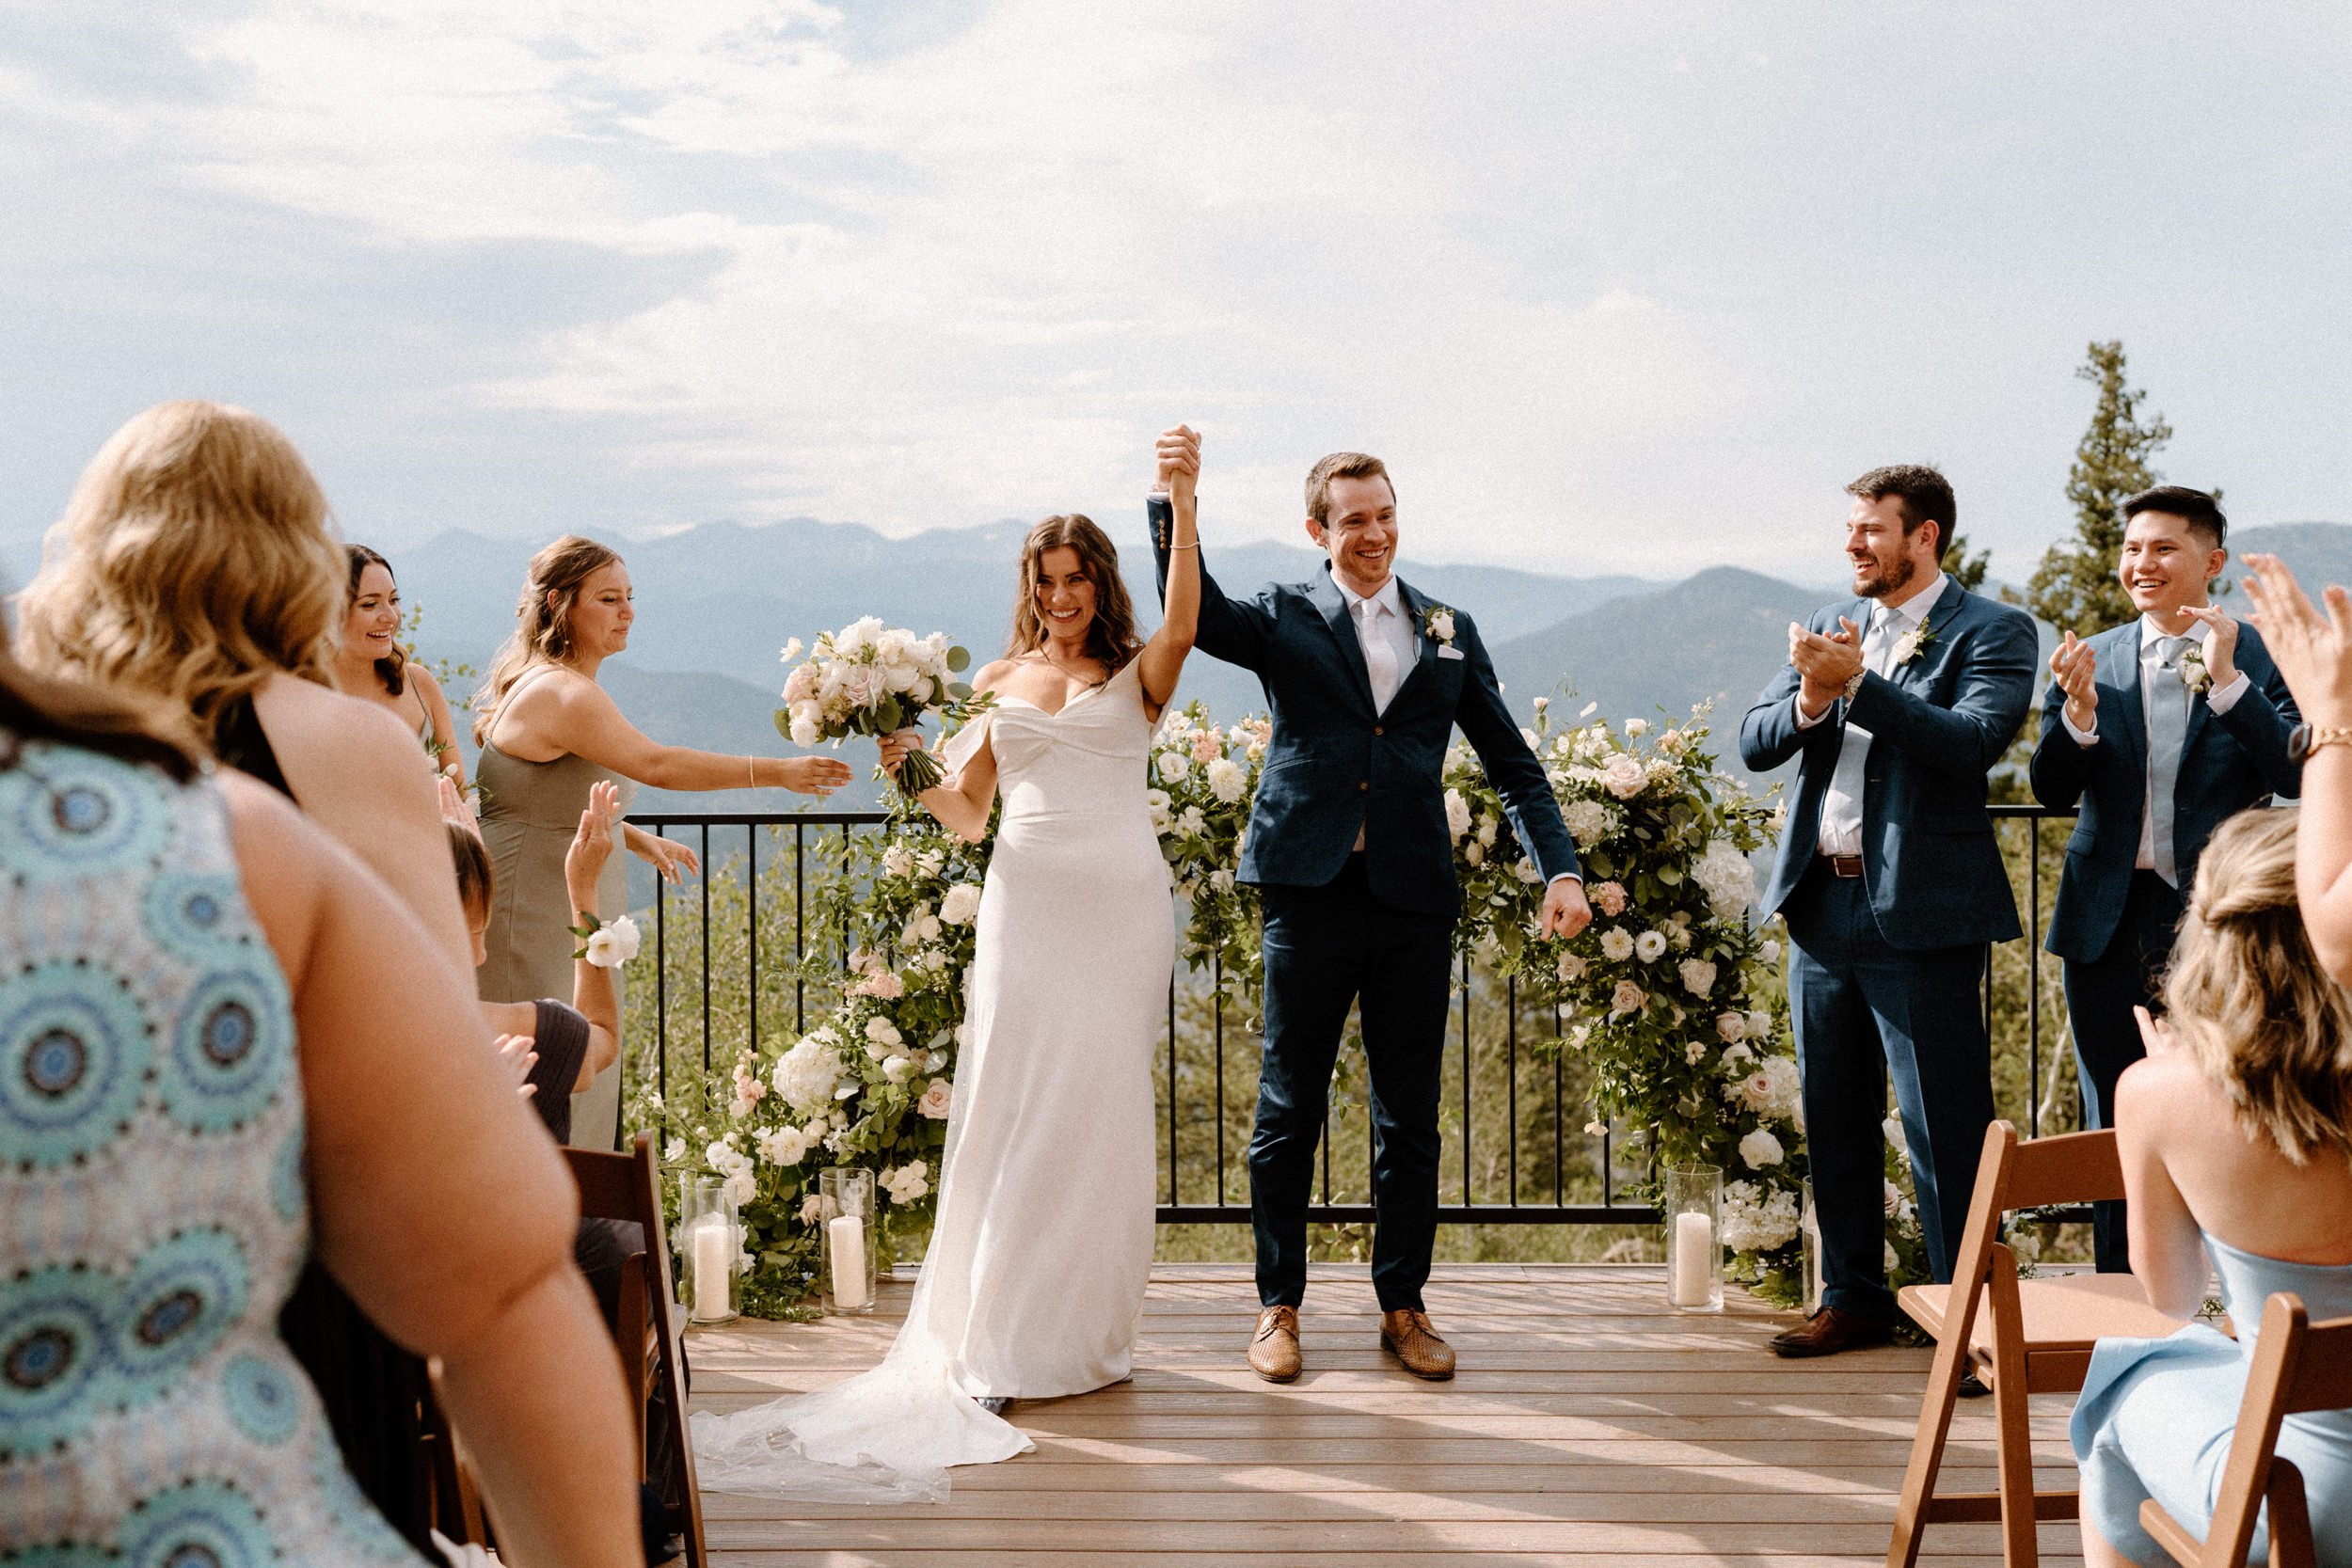 The bride and groom raise their hands in celebration at the altar at North Star Gatherings in Idaho Springs, CO